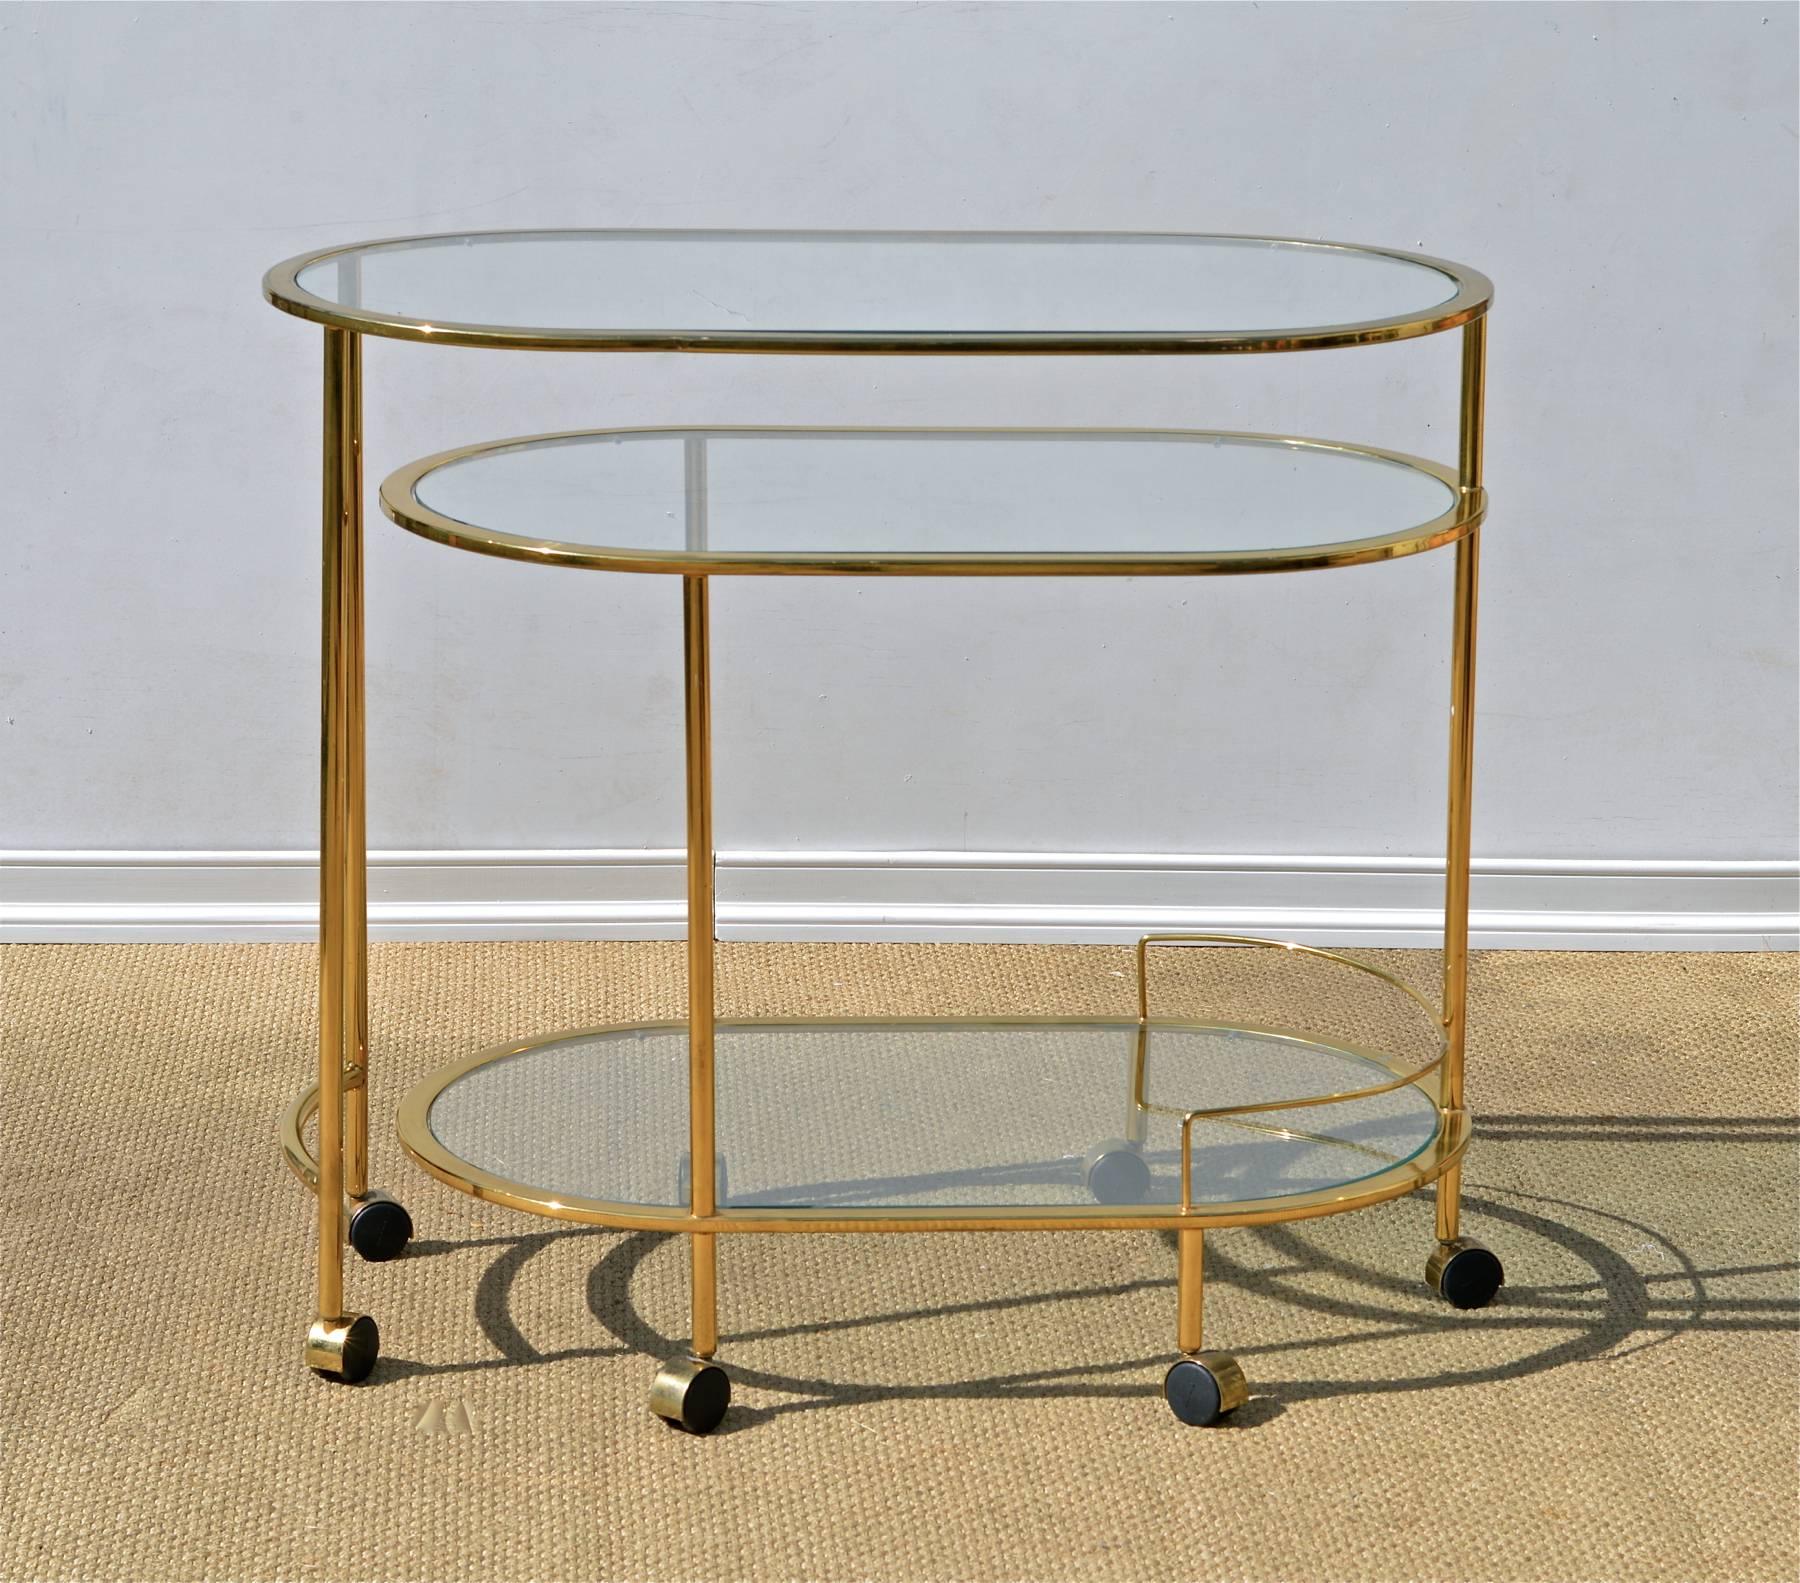 Vintage bar cart of brass and glass in the manner of Karl Springer. The functional service trolley articulates 180 degrees to provide maximum surface area for entertaining.